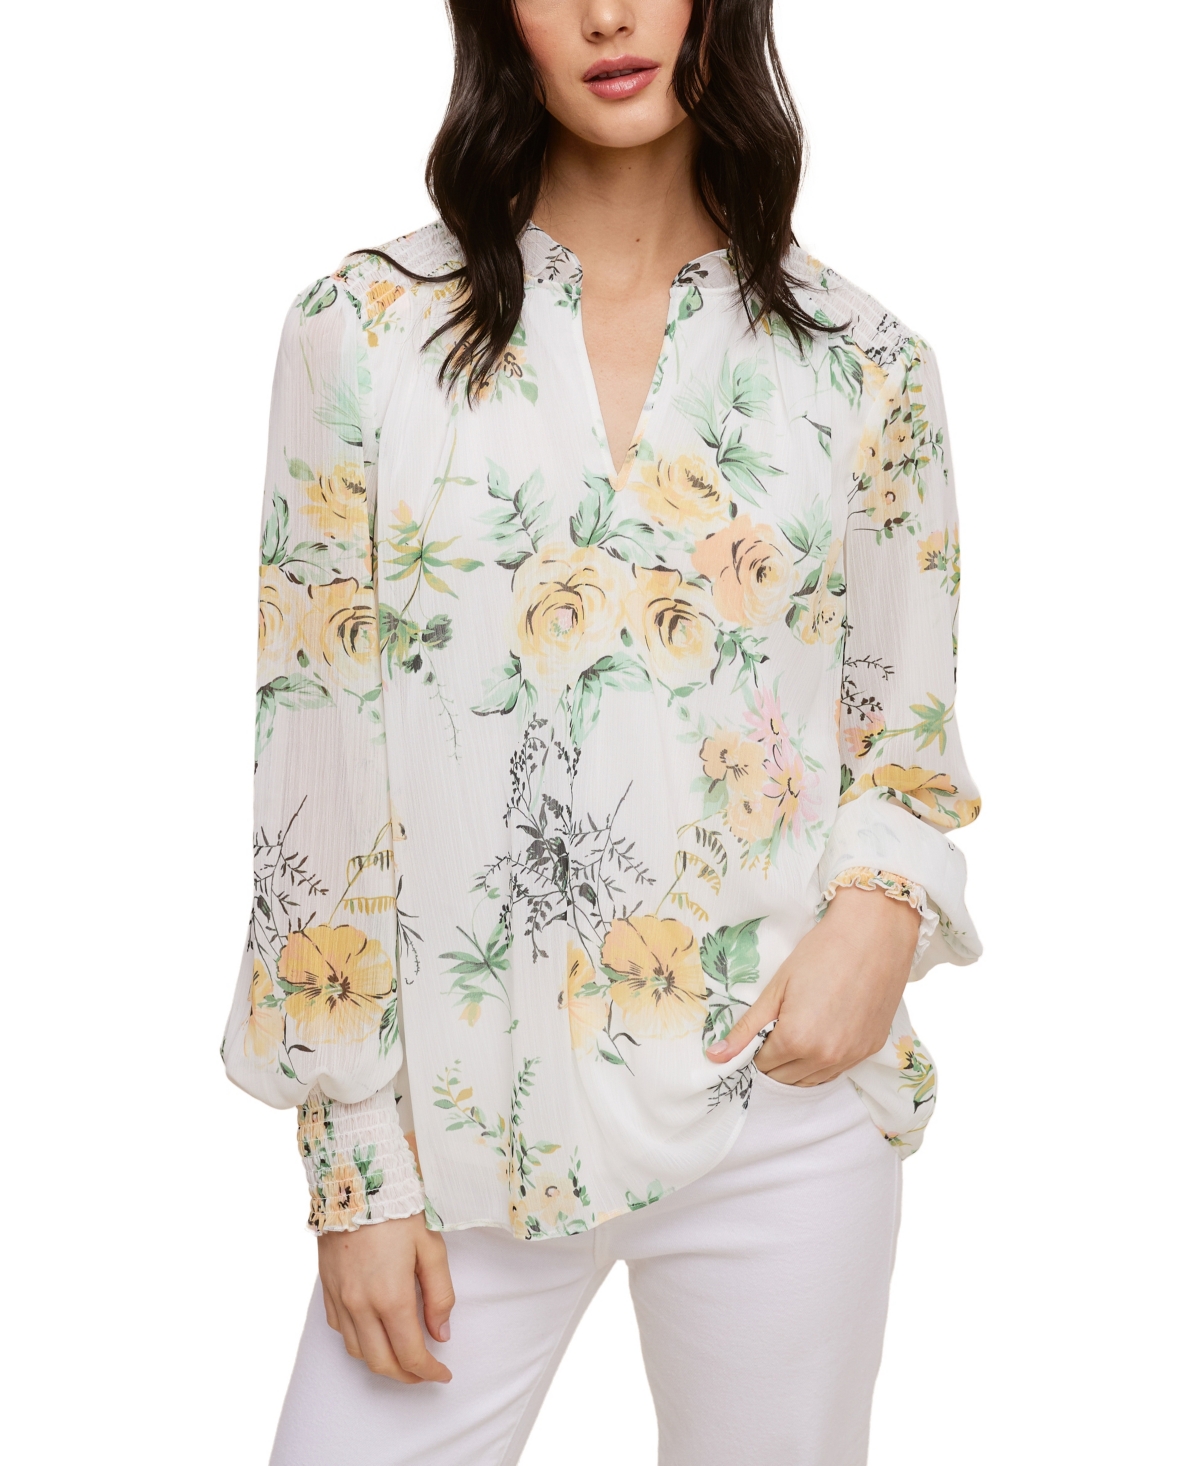 Printed Yoryu Blouse With Smocked Cuff - IVORY